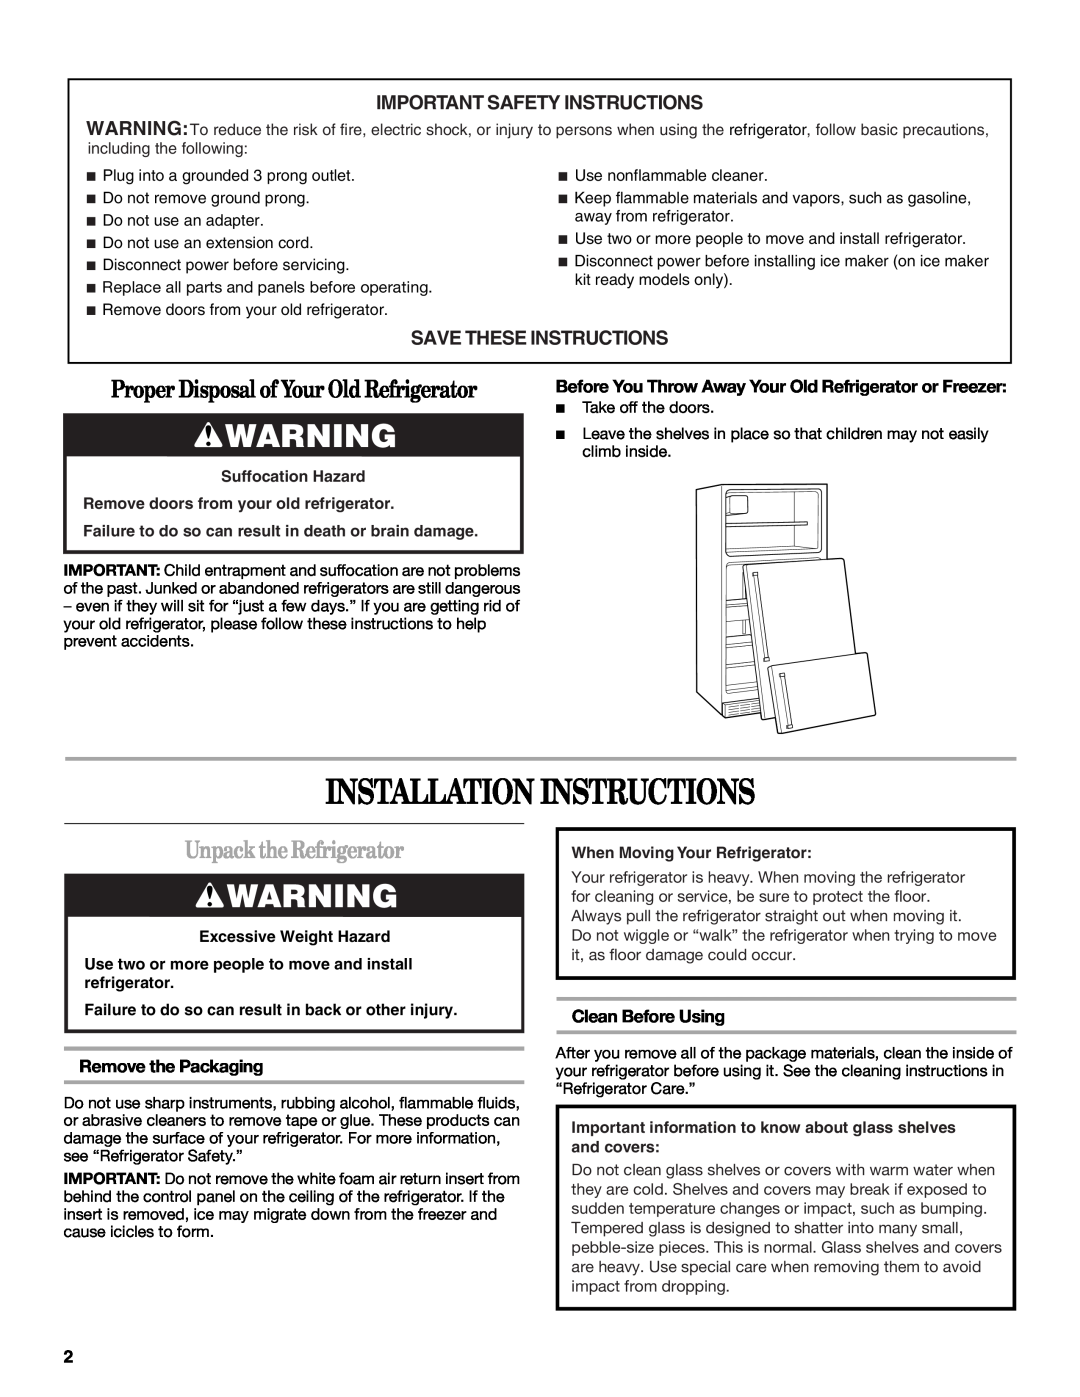 Whirlpool WF-L200V Installation Instructions, Unpack the Refrigerator, Important Safety Instructions, Remove the Packaging 